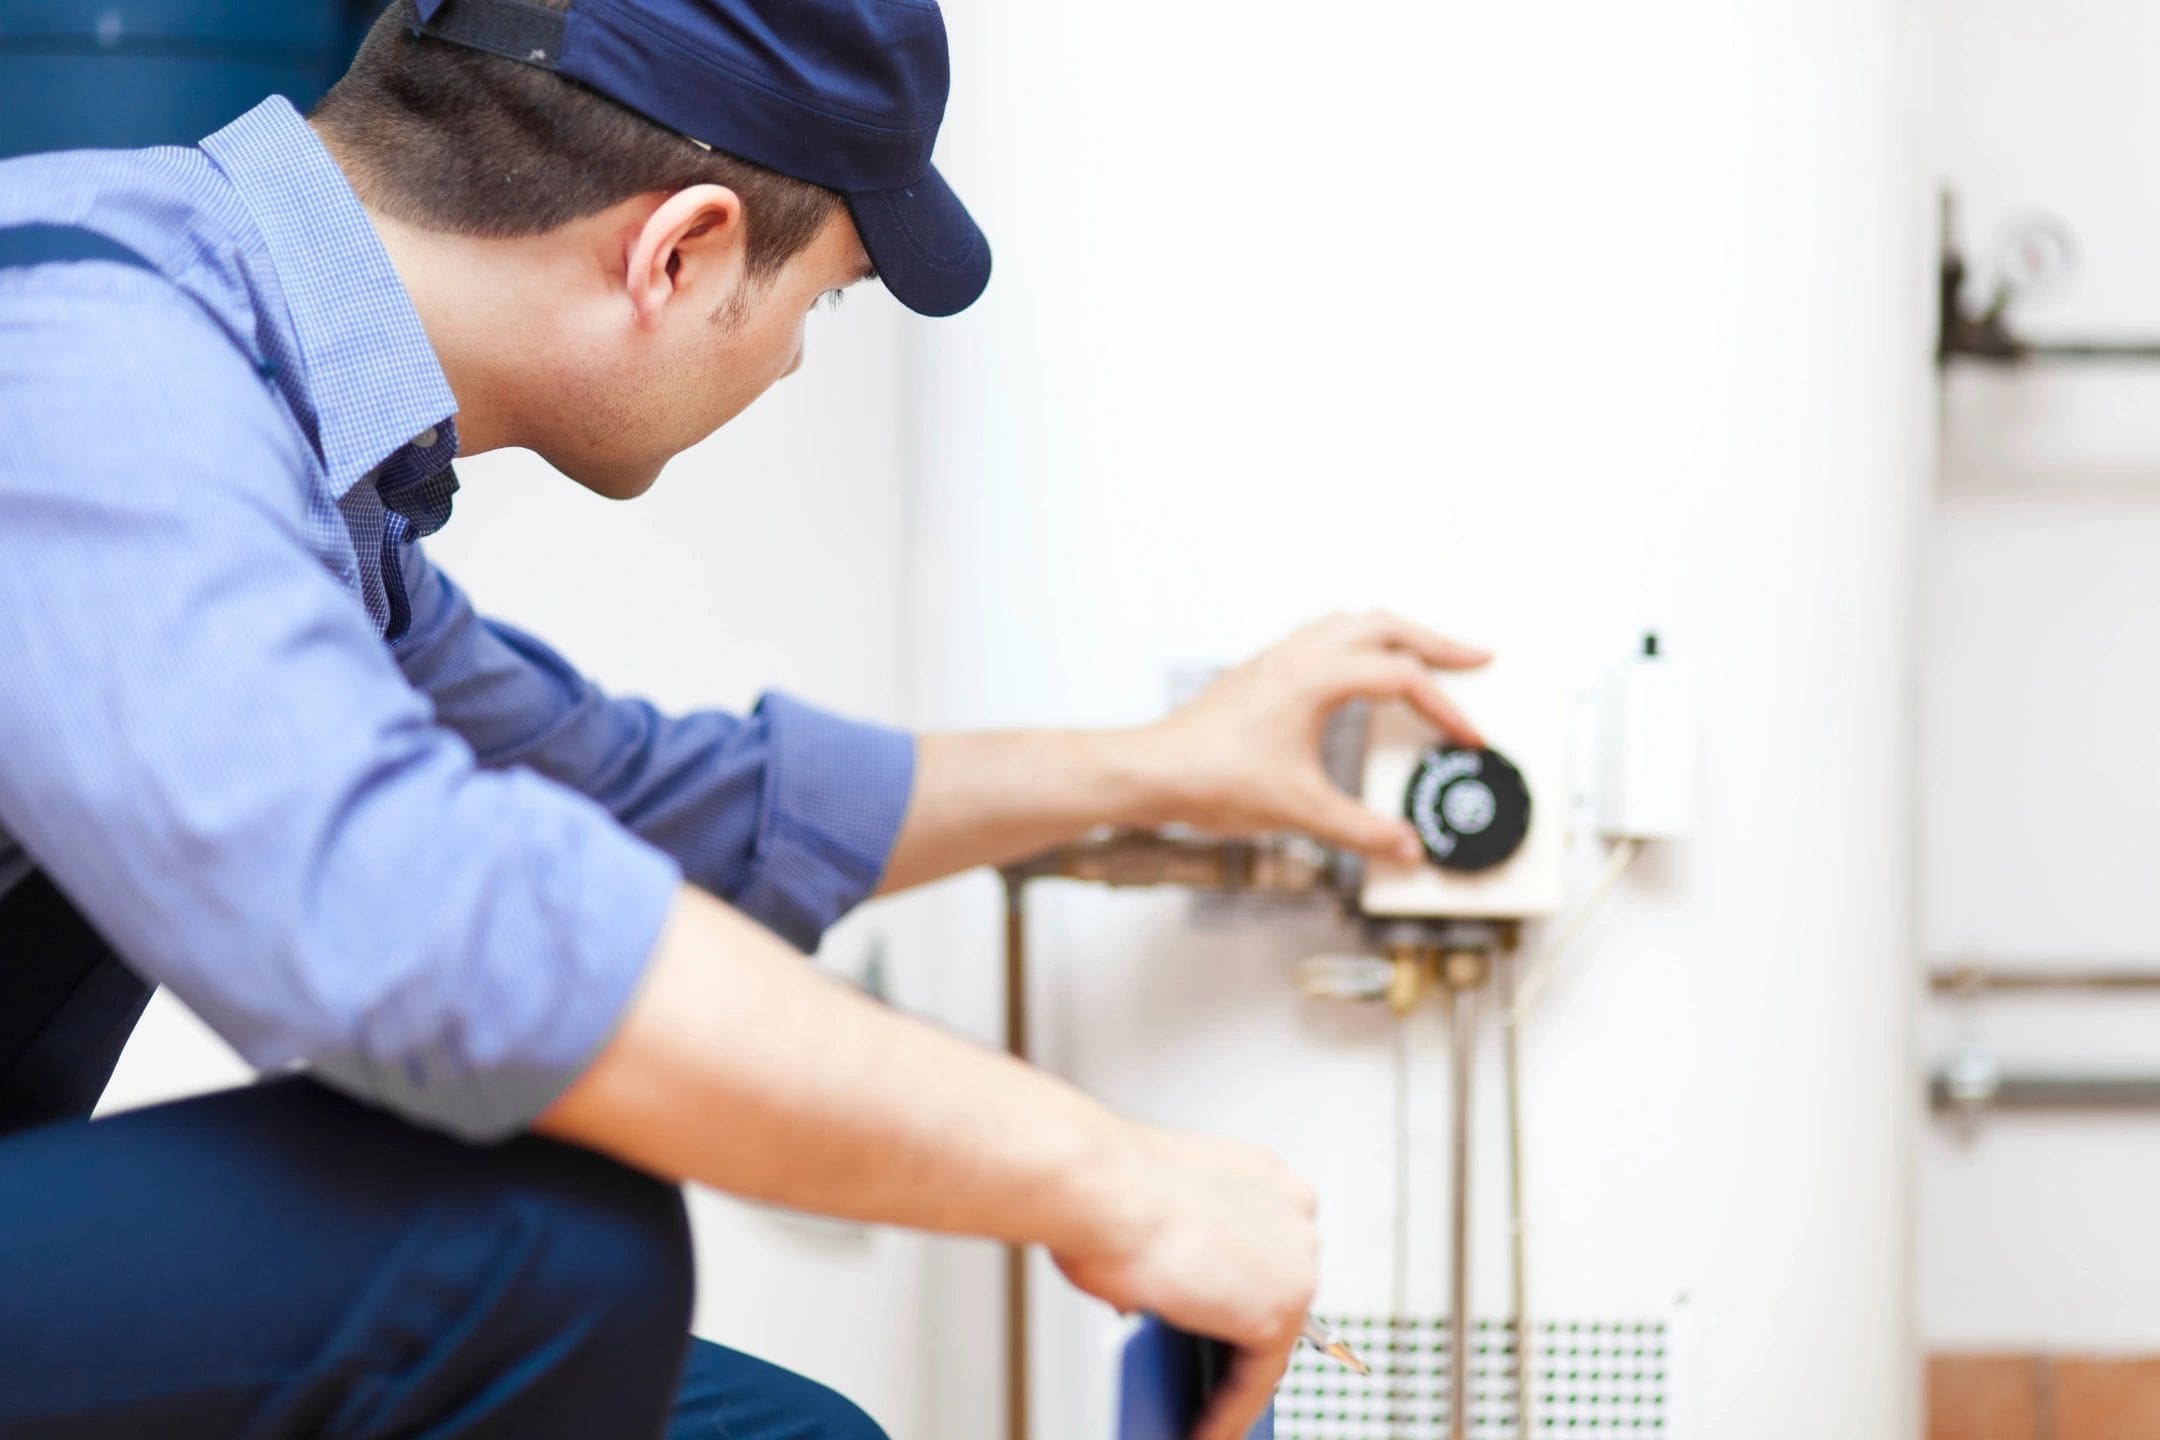 A man in a blue shirt and hat checking a hot water heater.